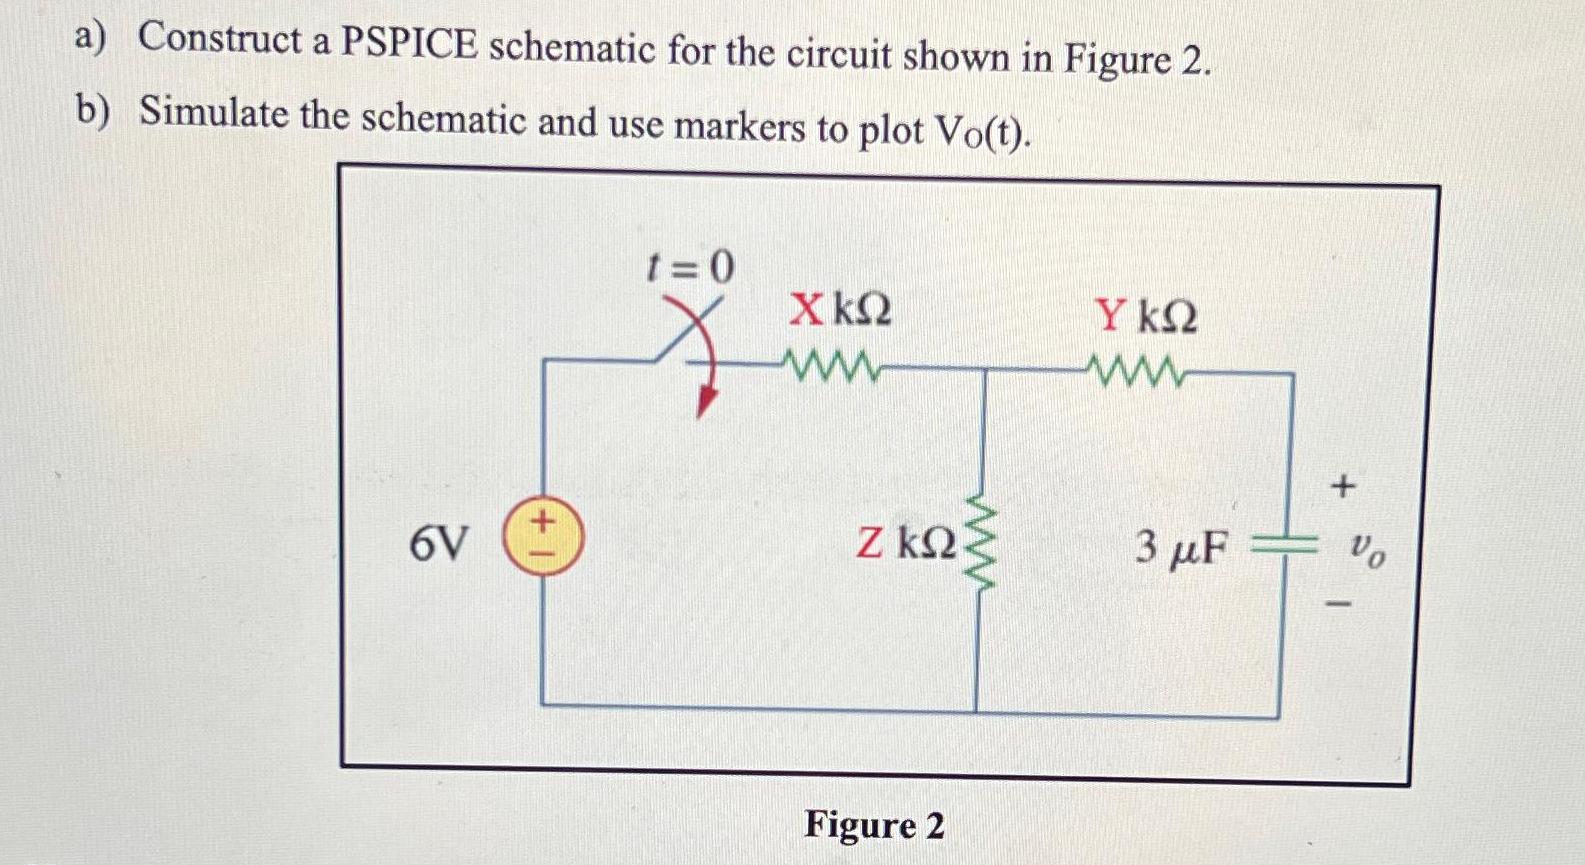 a) Construct a PSPICE schematic for the circuit shown in Figure 2. b) Simulate the schematic and use markers